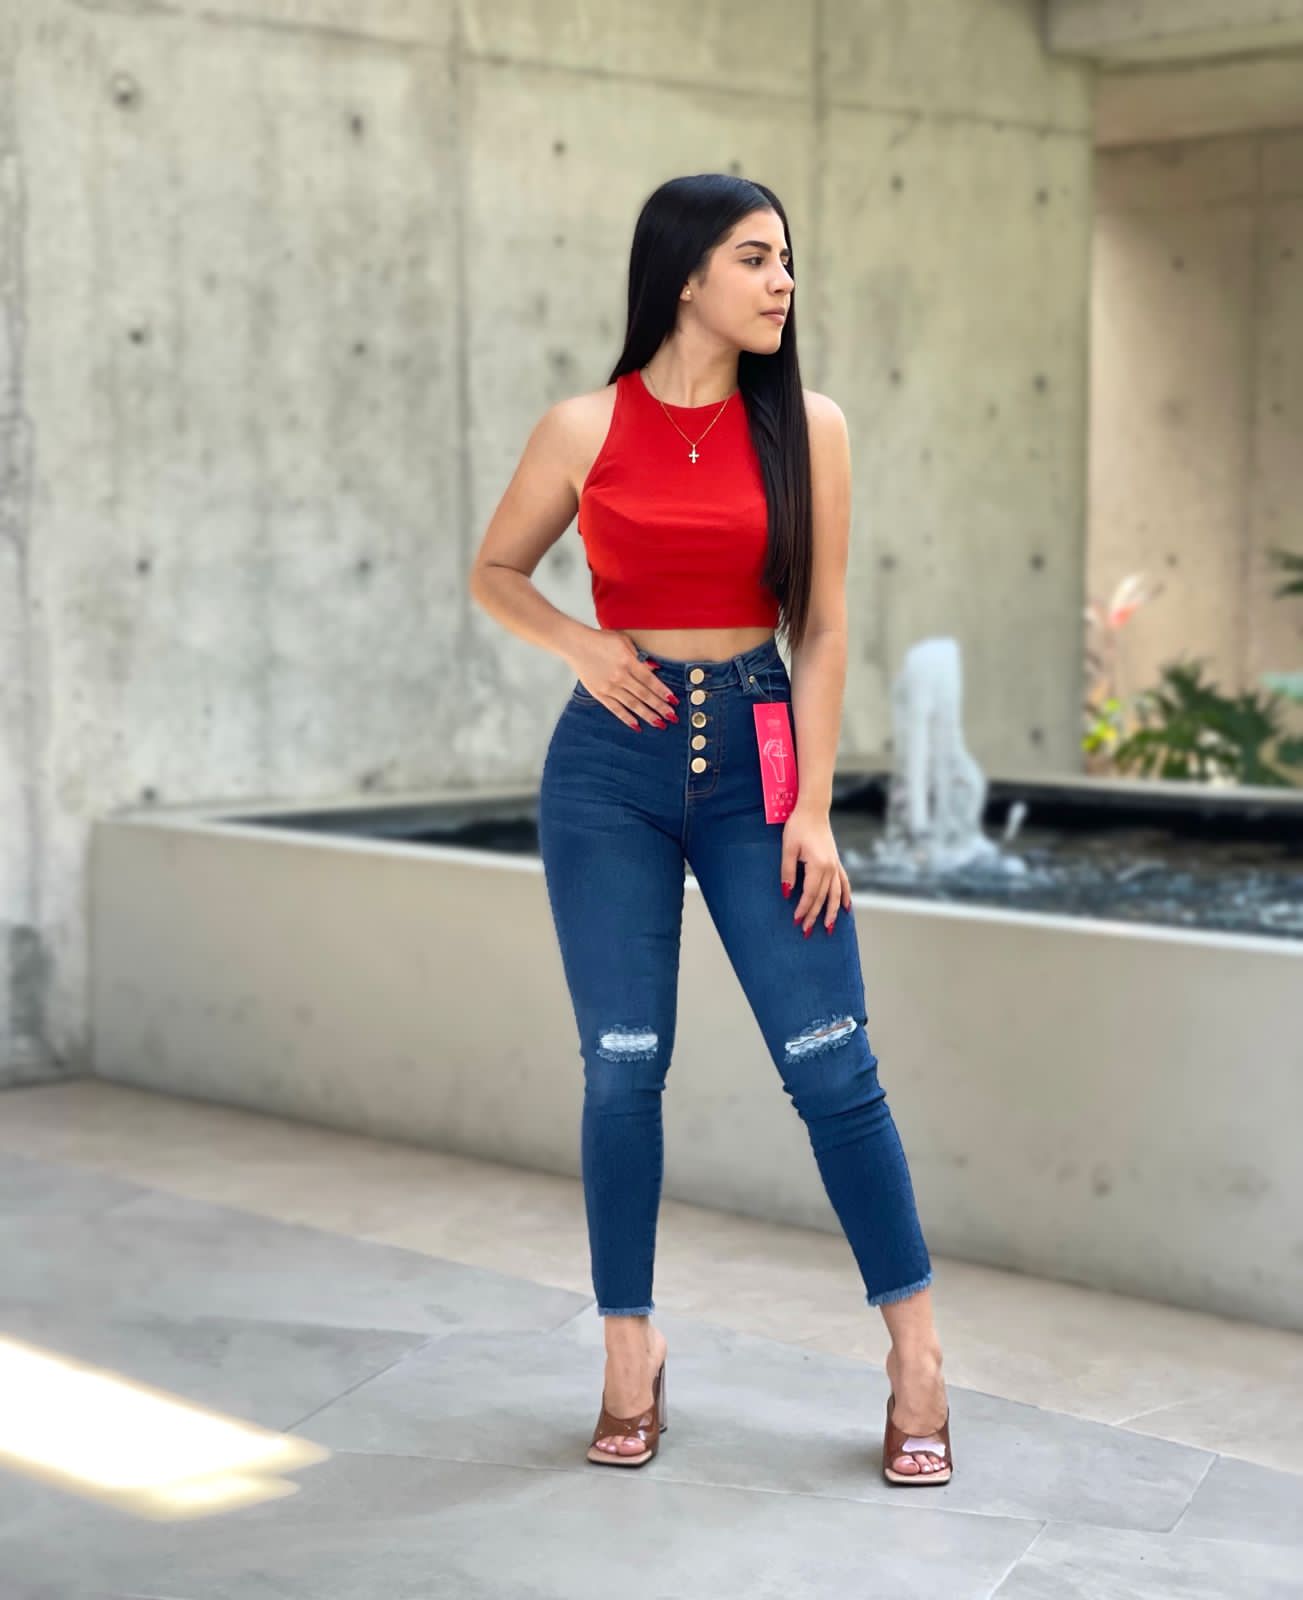 OLIVIA COLOMBIAN🇨🇴 JEANS